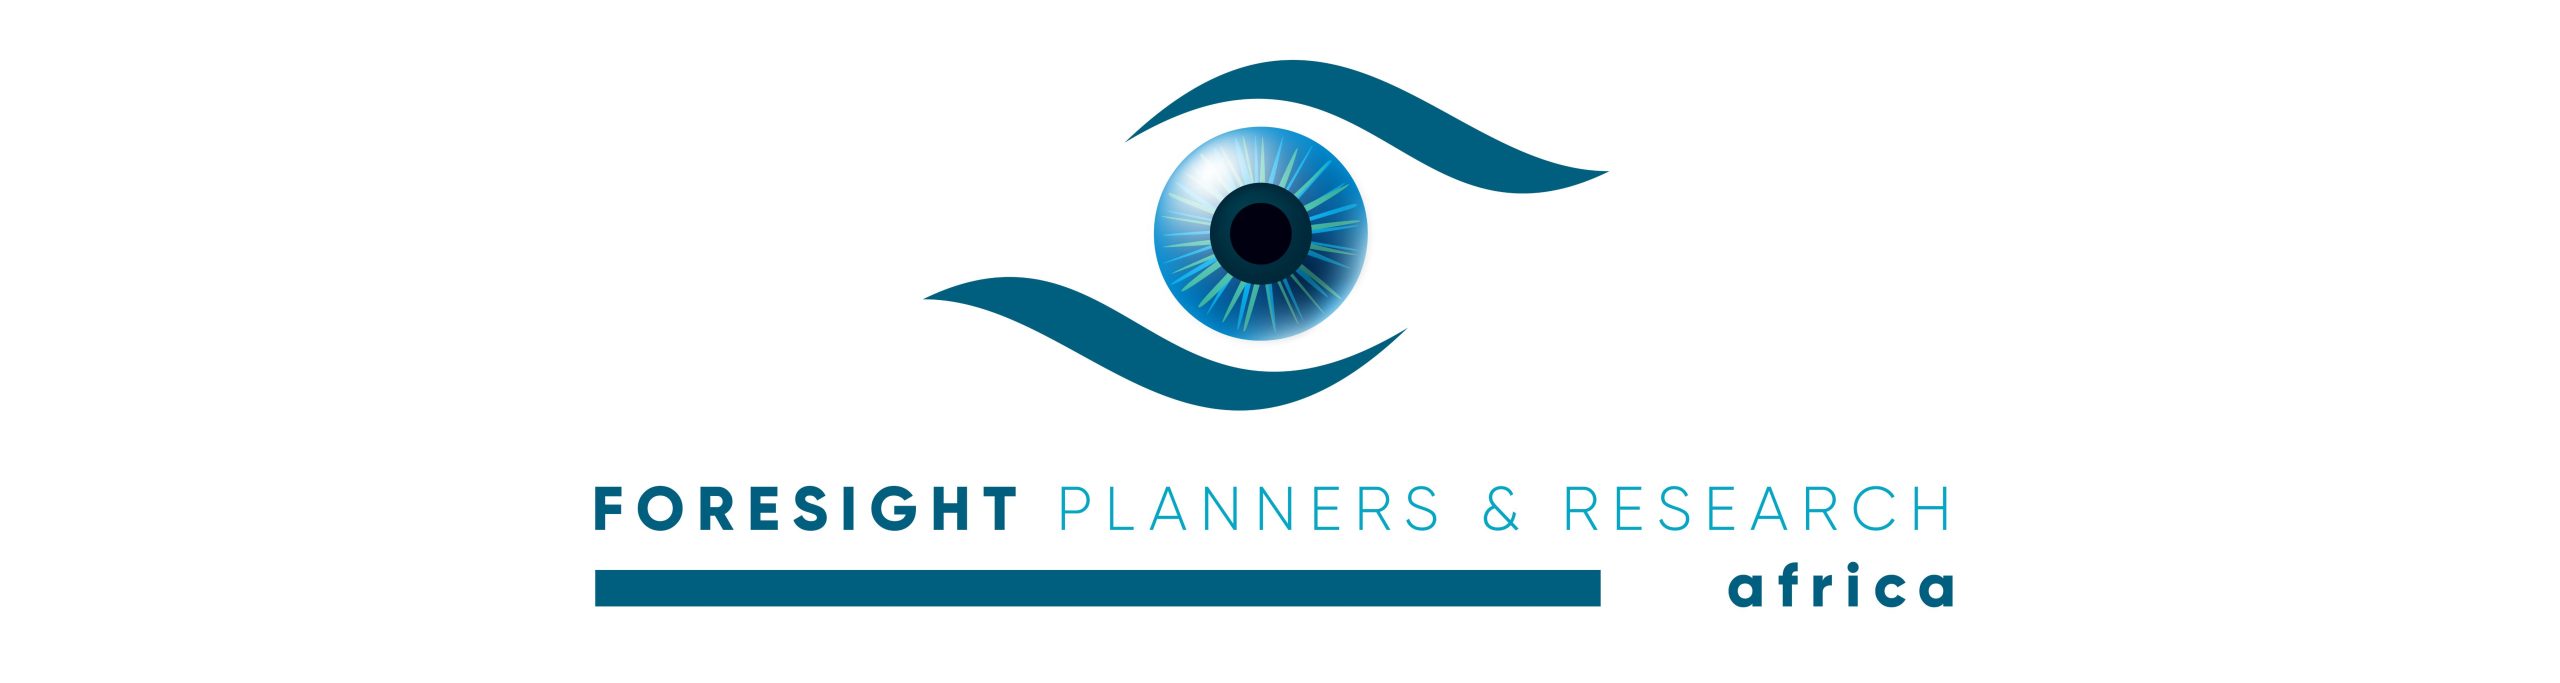 Foresight Planners